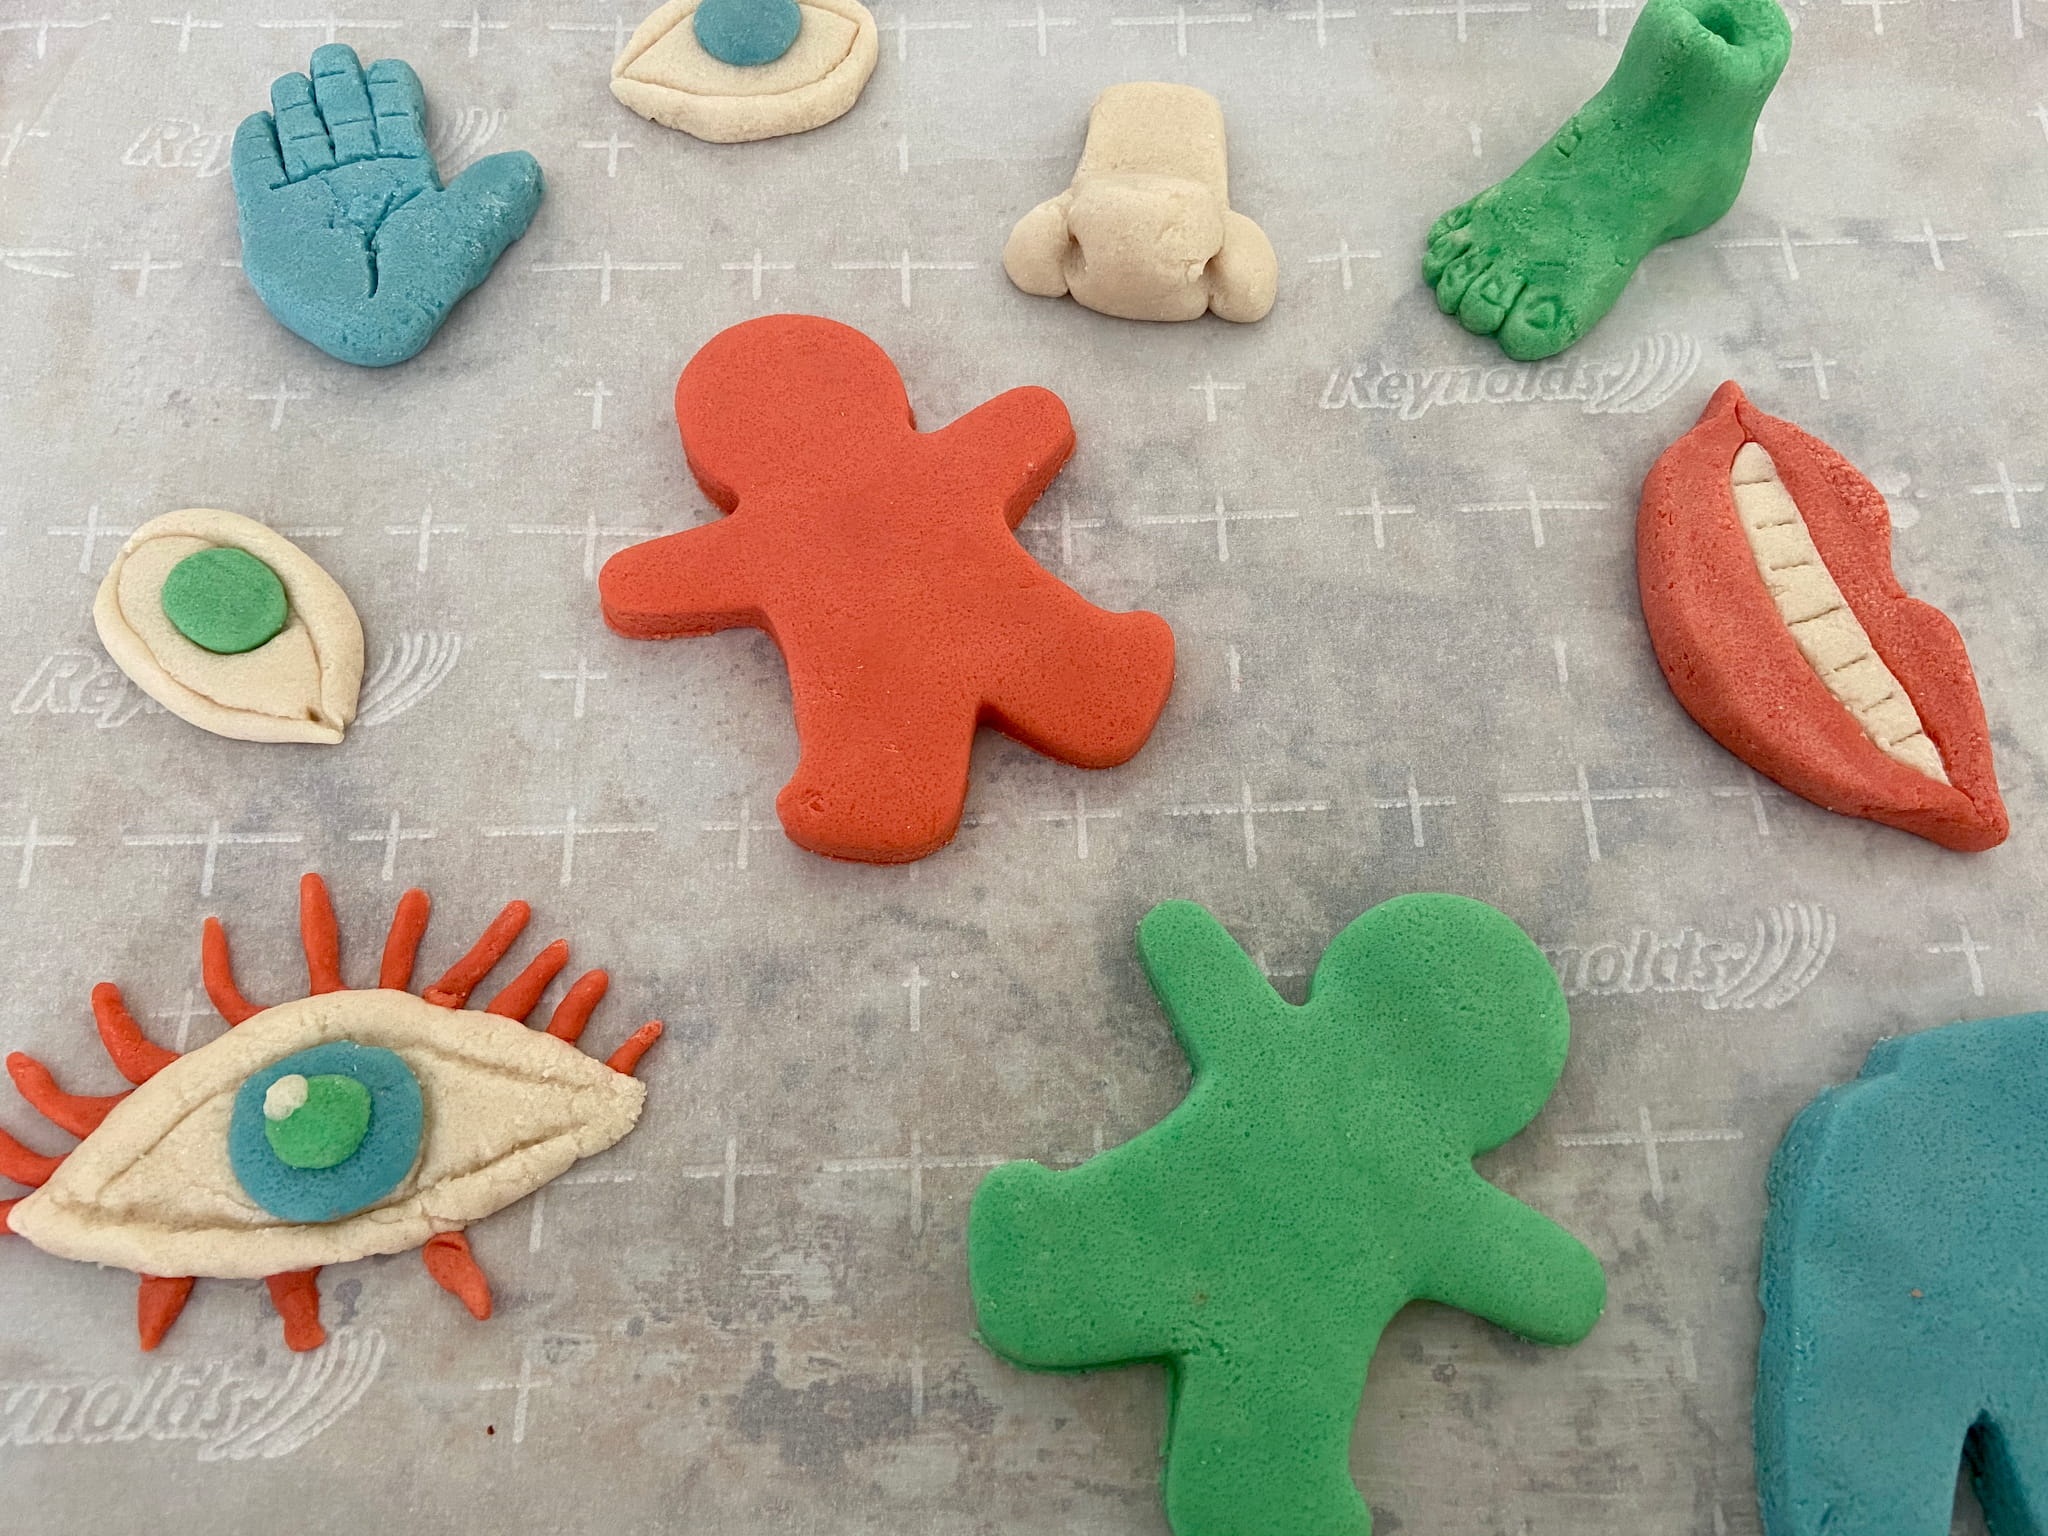 DIY Clay Sculptures -Sculpt your desired shapes and bake at 250º for one hour. Craft in America